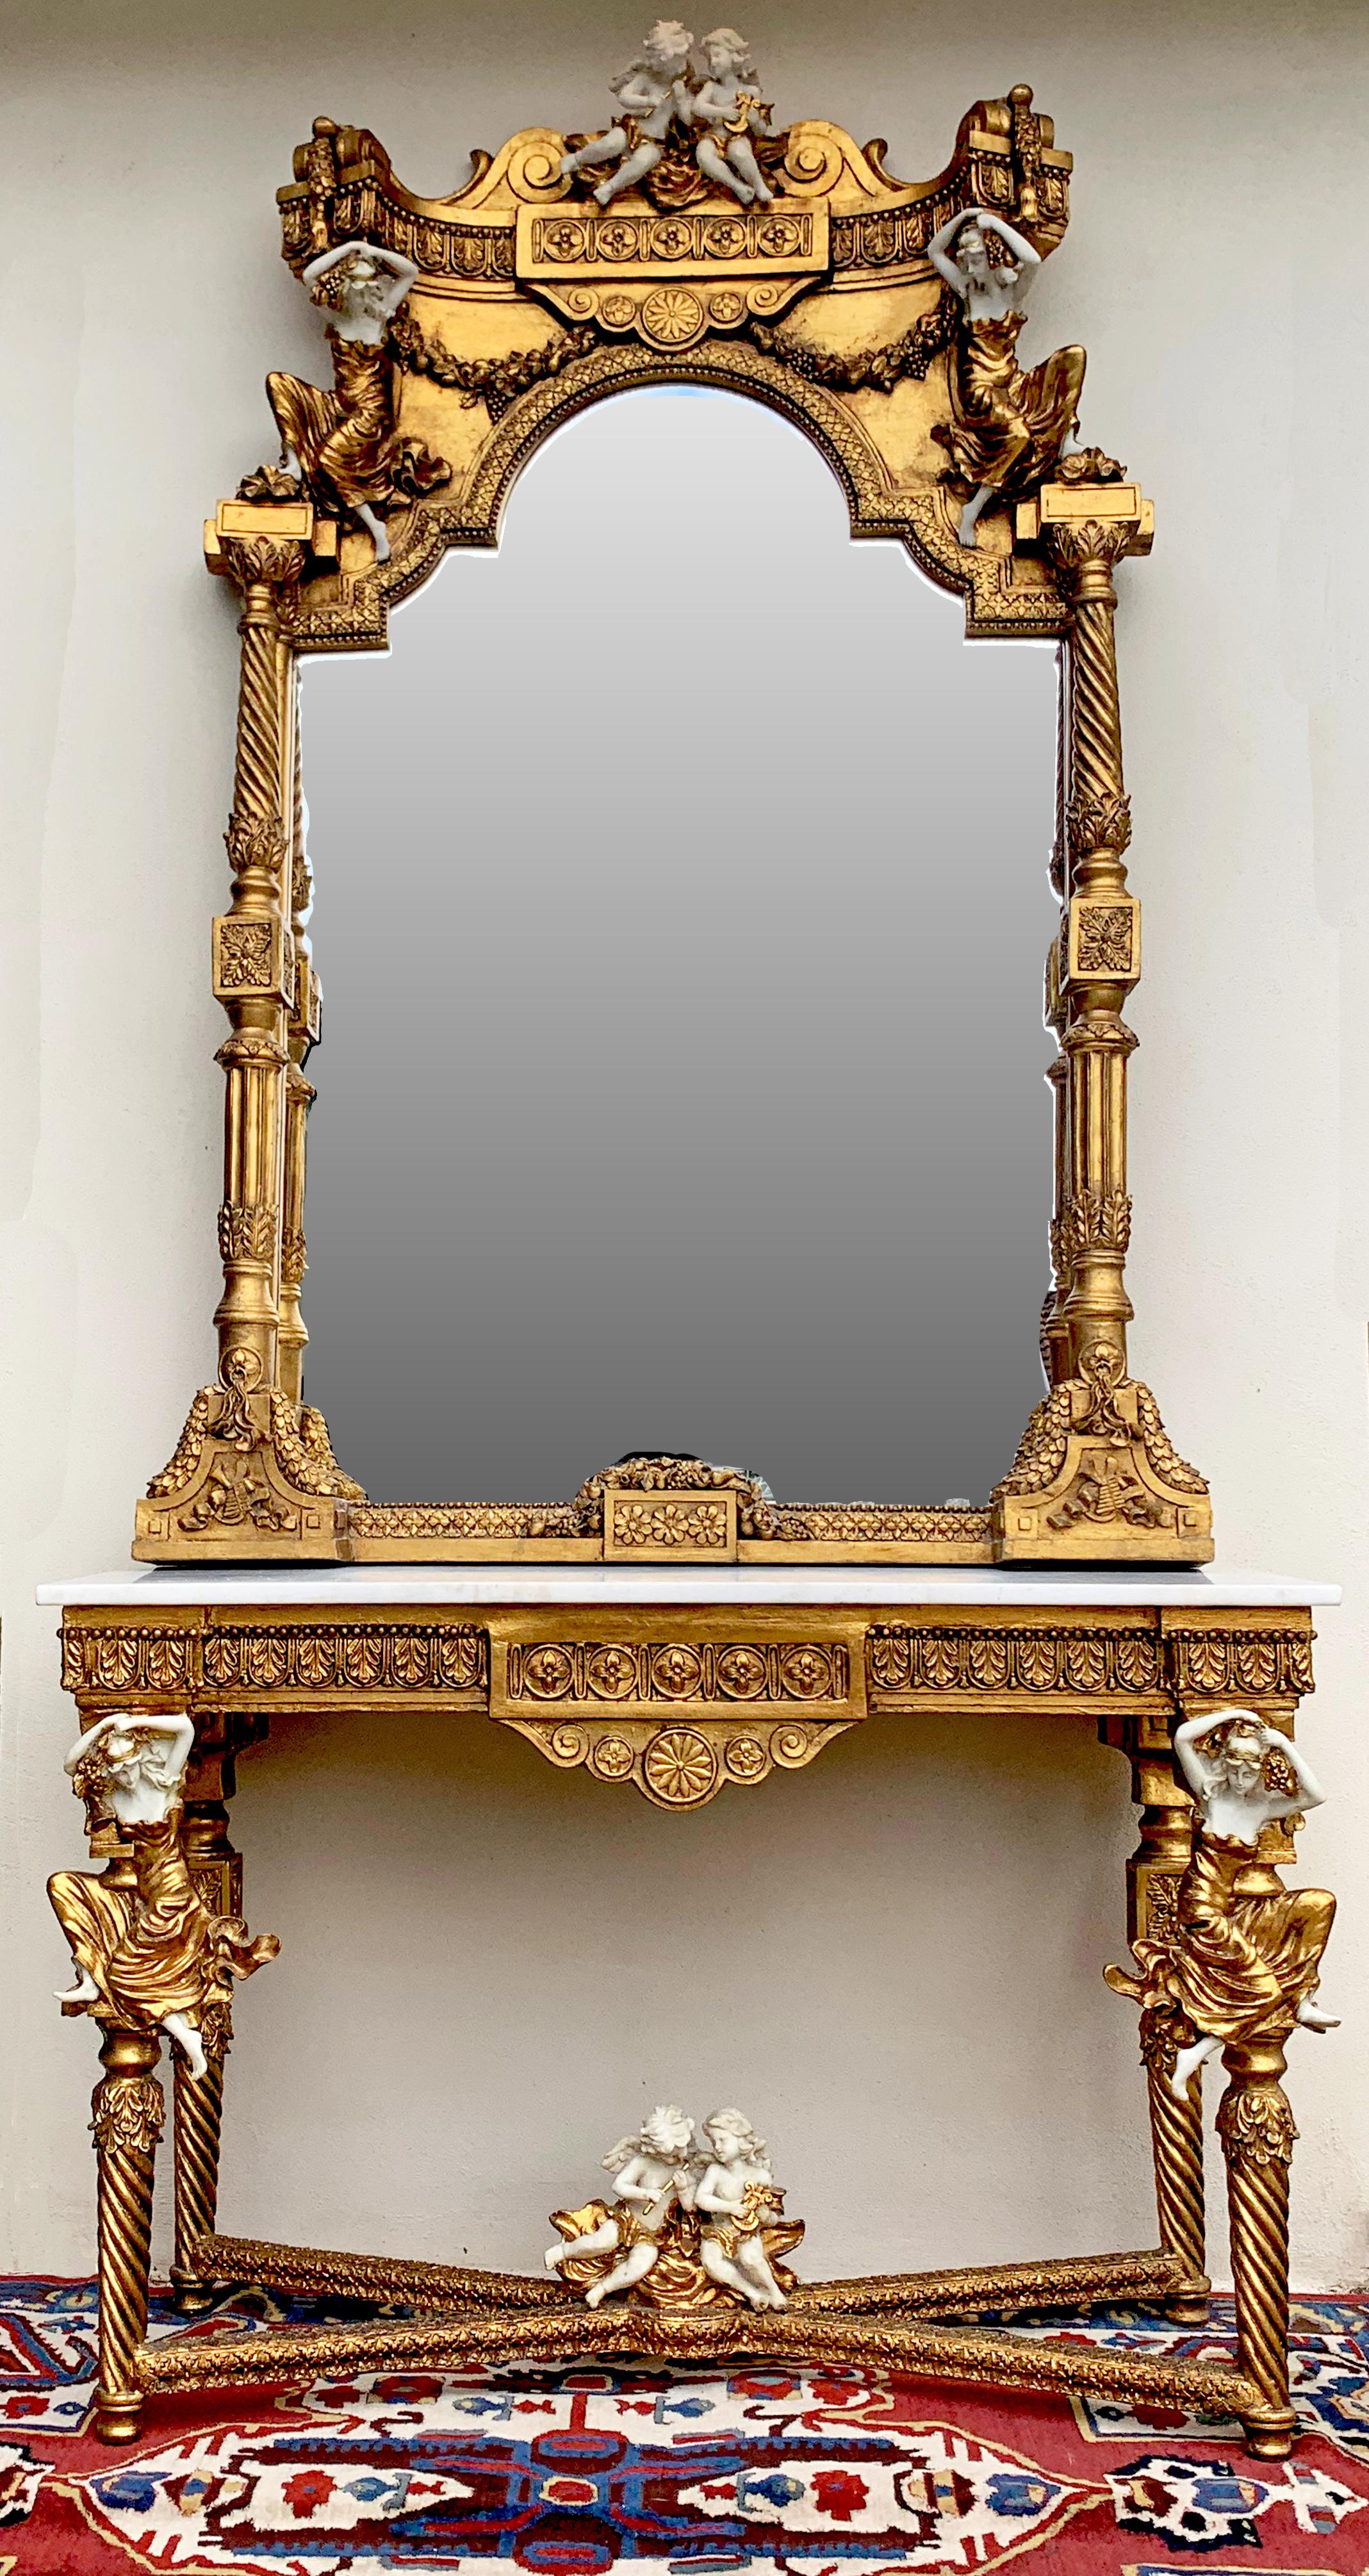 Beautiful and ornate solid wood mirror with cast stone angels and figures on both mirror and matching console table.
Console table top is a white marble (slight scratches).
Very elegant and luxuriously worked piece, made in Europe. (probably